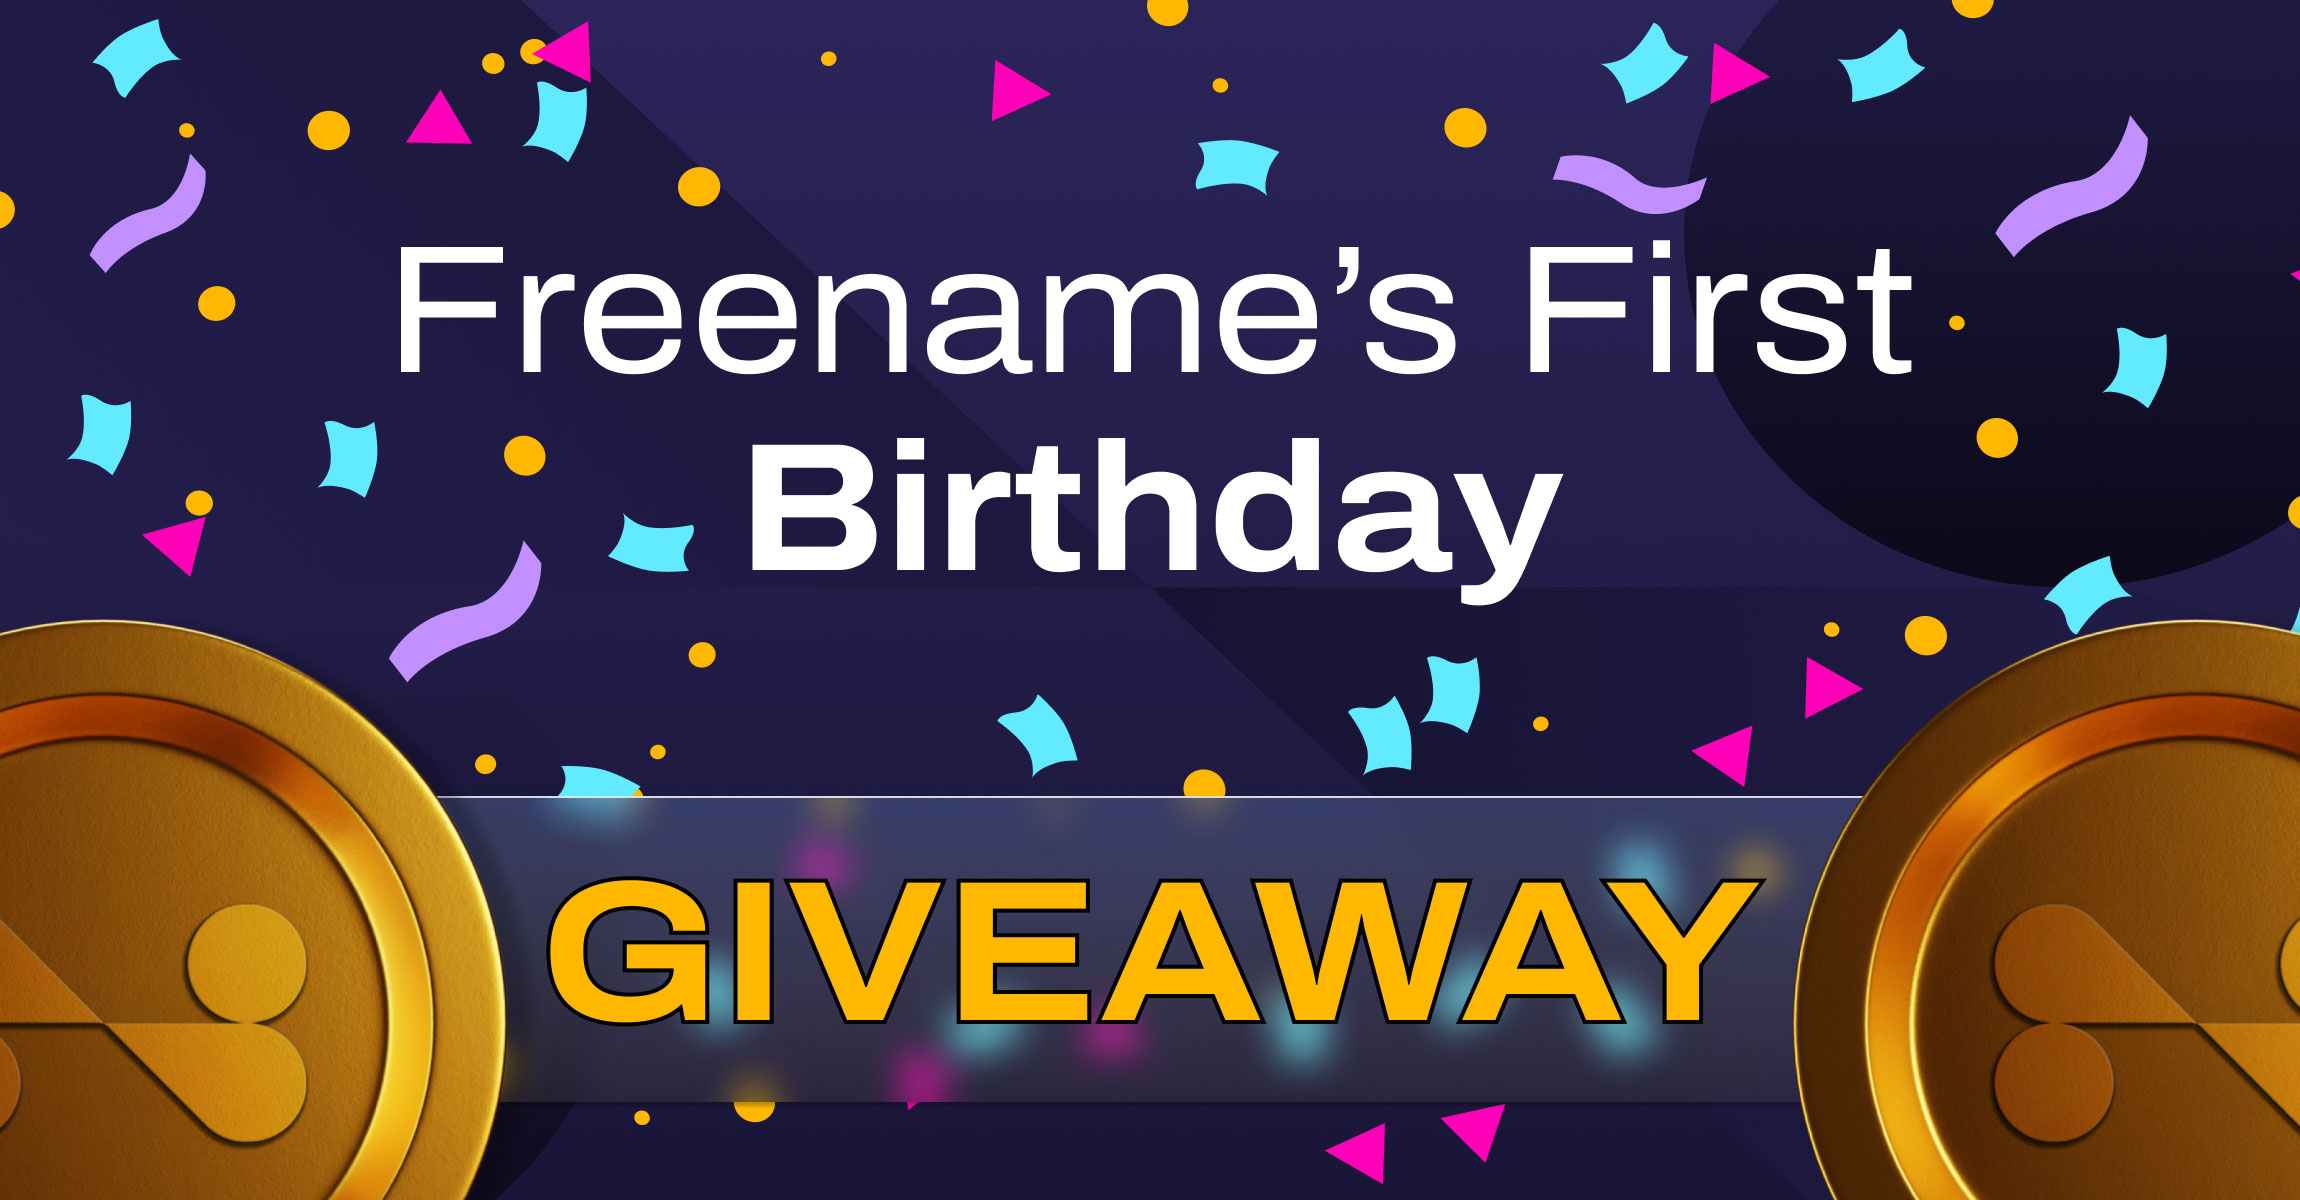 Freename's First Birthday Giveaway